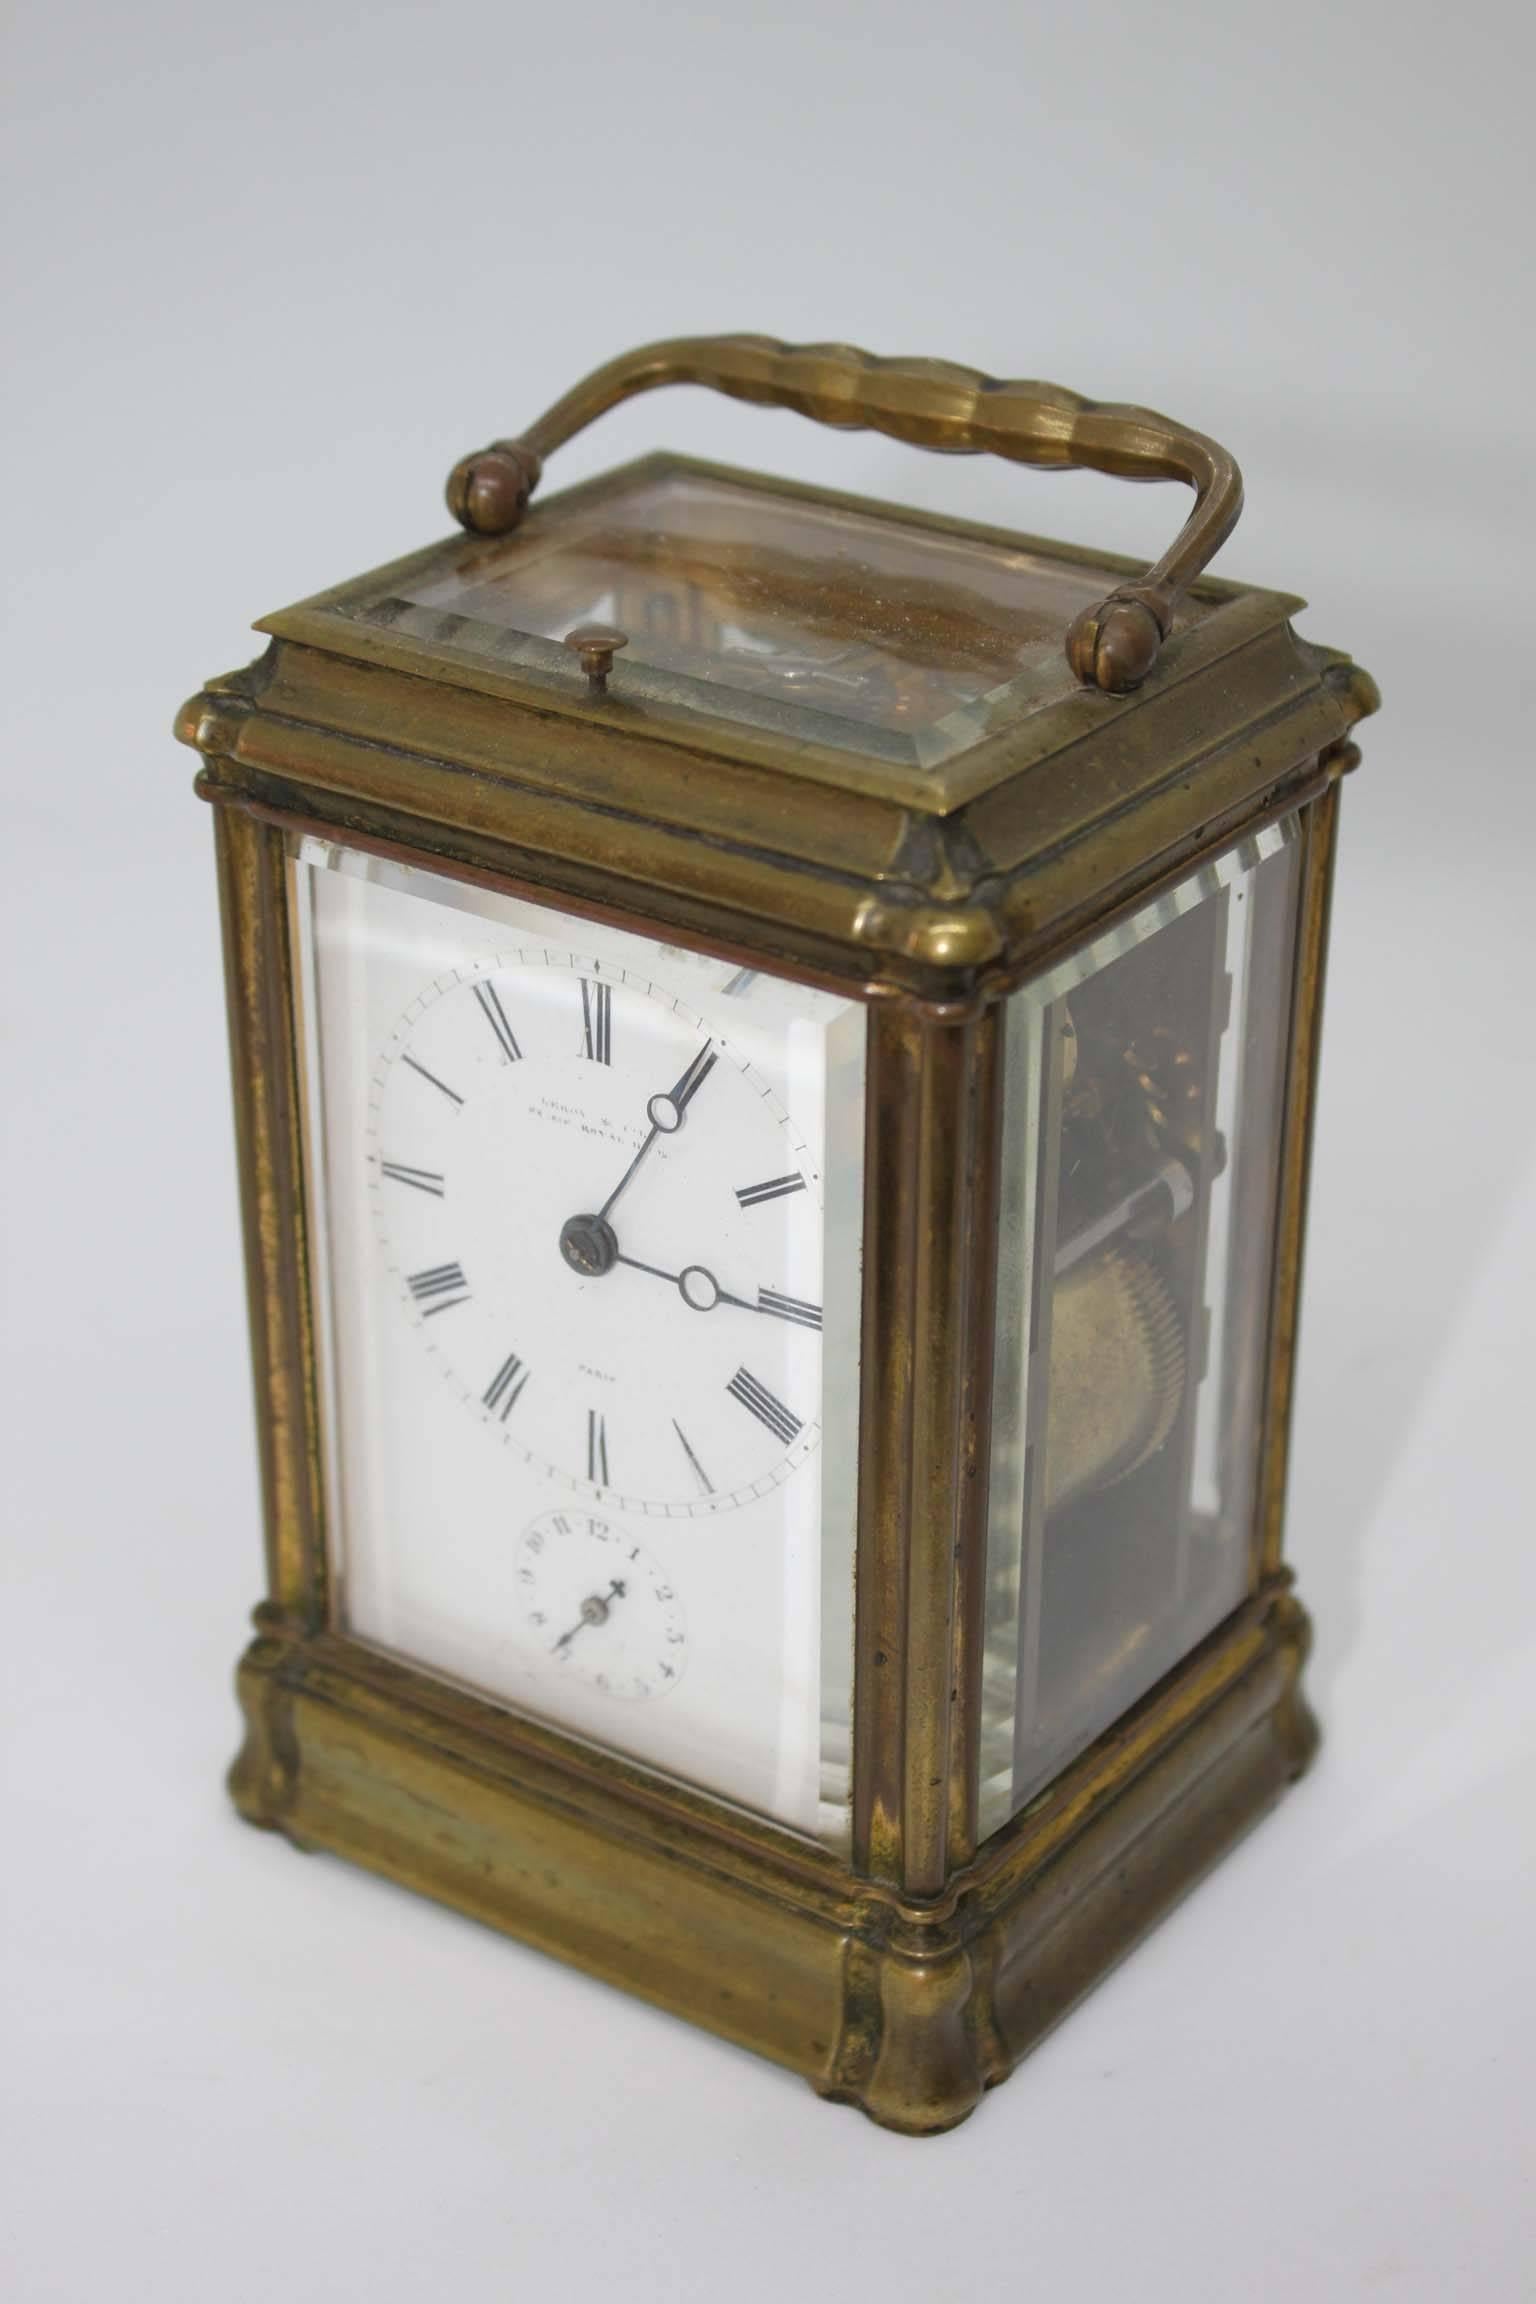 Beautiful officer's clock signed by famous clockmaker Leroy, in its original leather box. The Maison Leroy was founded by Bazile Charles Leroy in 1785 at the Palais Royal. He used to make clocks for Napoleon, the Duc de Bourbon... The successor